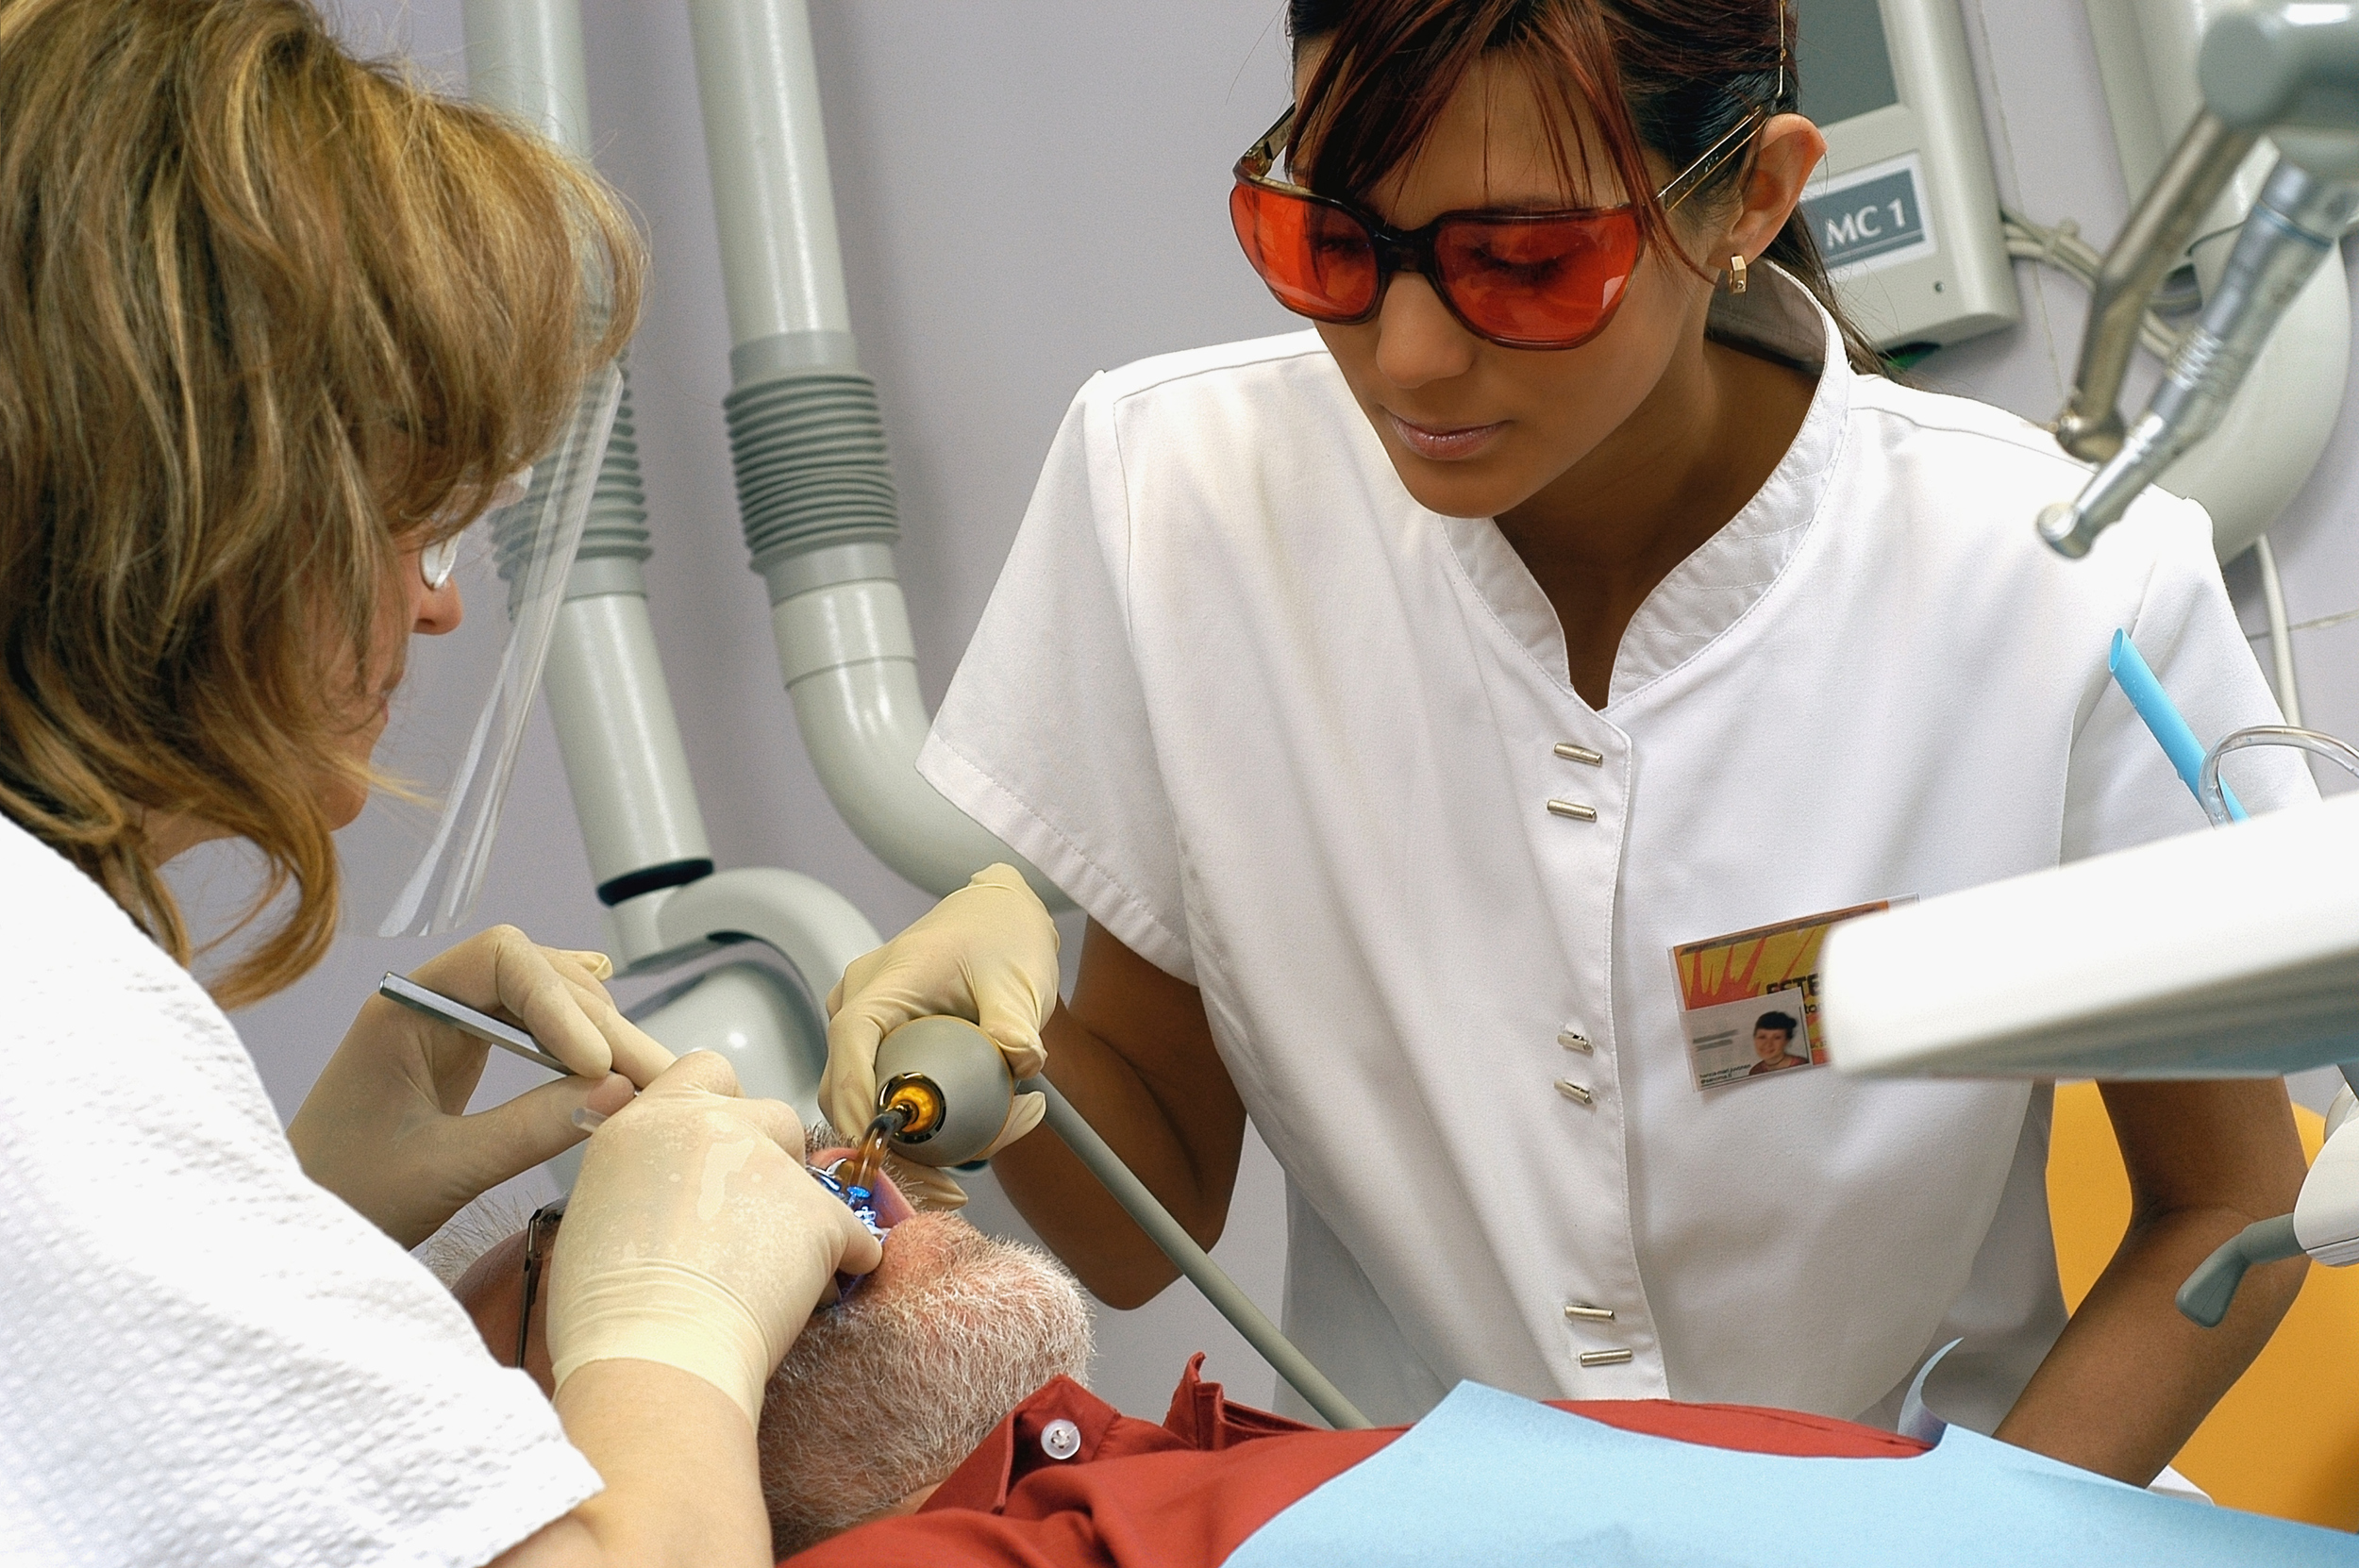 Become a dental assistant in just 10 weeks